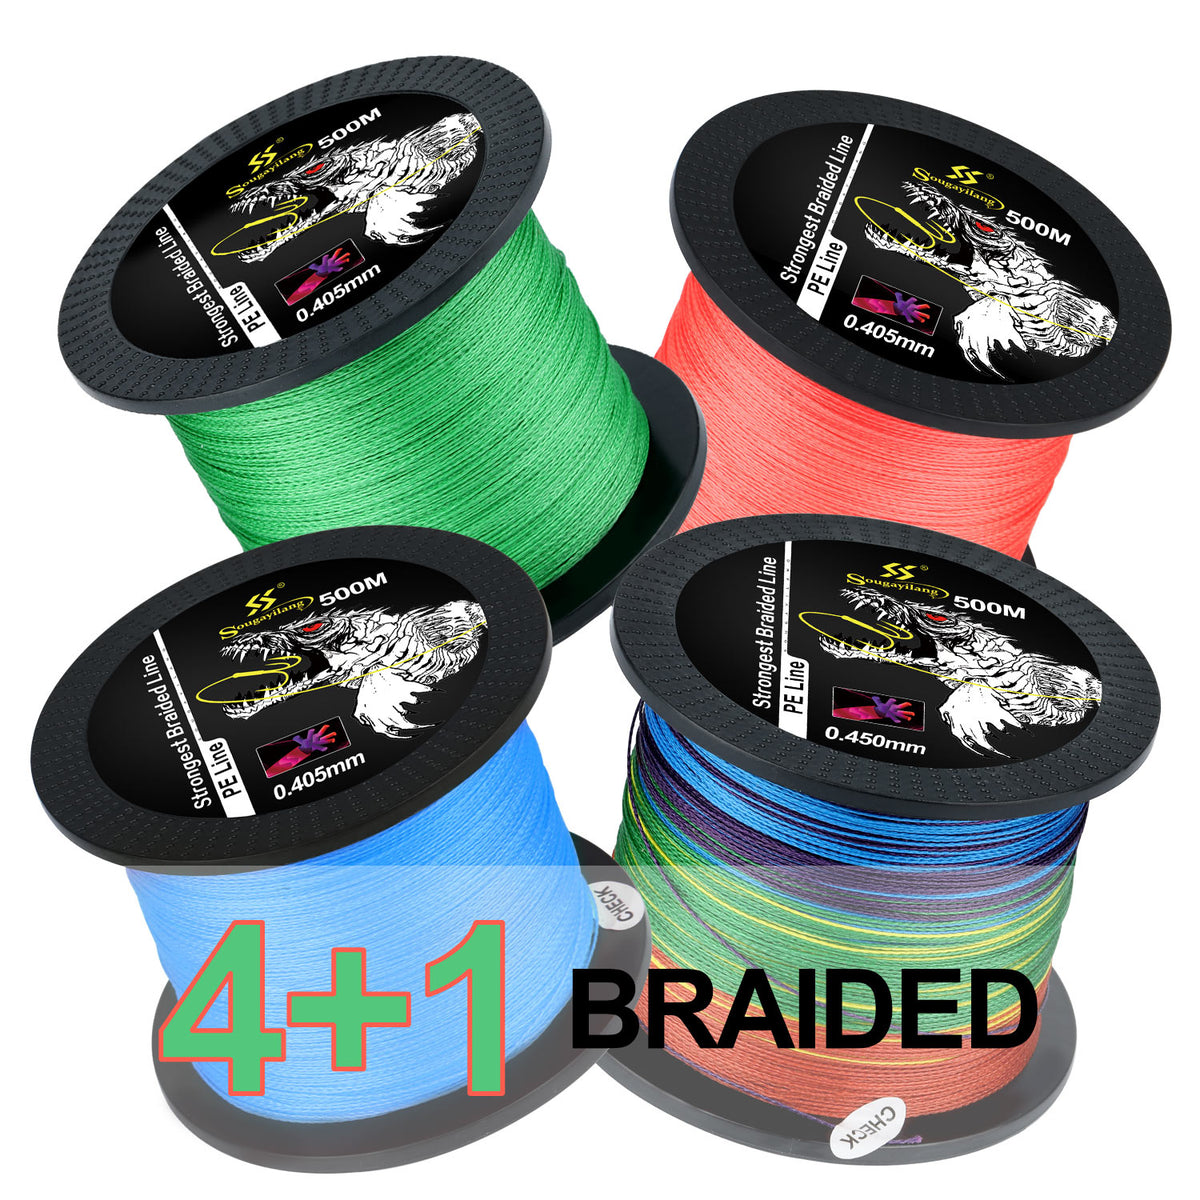 Sougayilang 9 Strands Braided Fishing Line Abrasion Resistant 20LB Braided  Lines Incredible Super Strong PE Fishing Lines Braid-80 LB (Multi-Color)  0.405mm-601 Yds : : Sports, Fitness & Outdoors